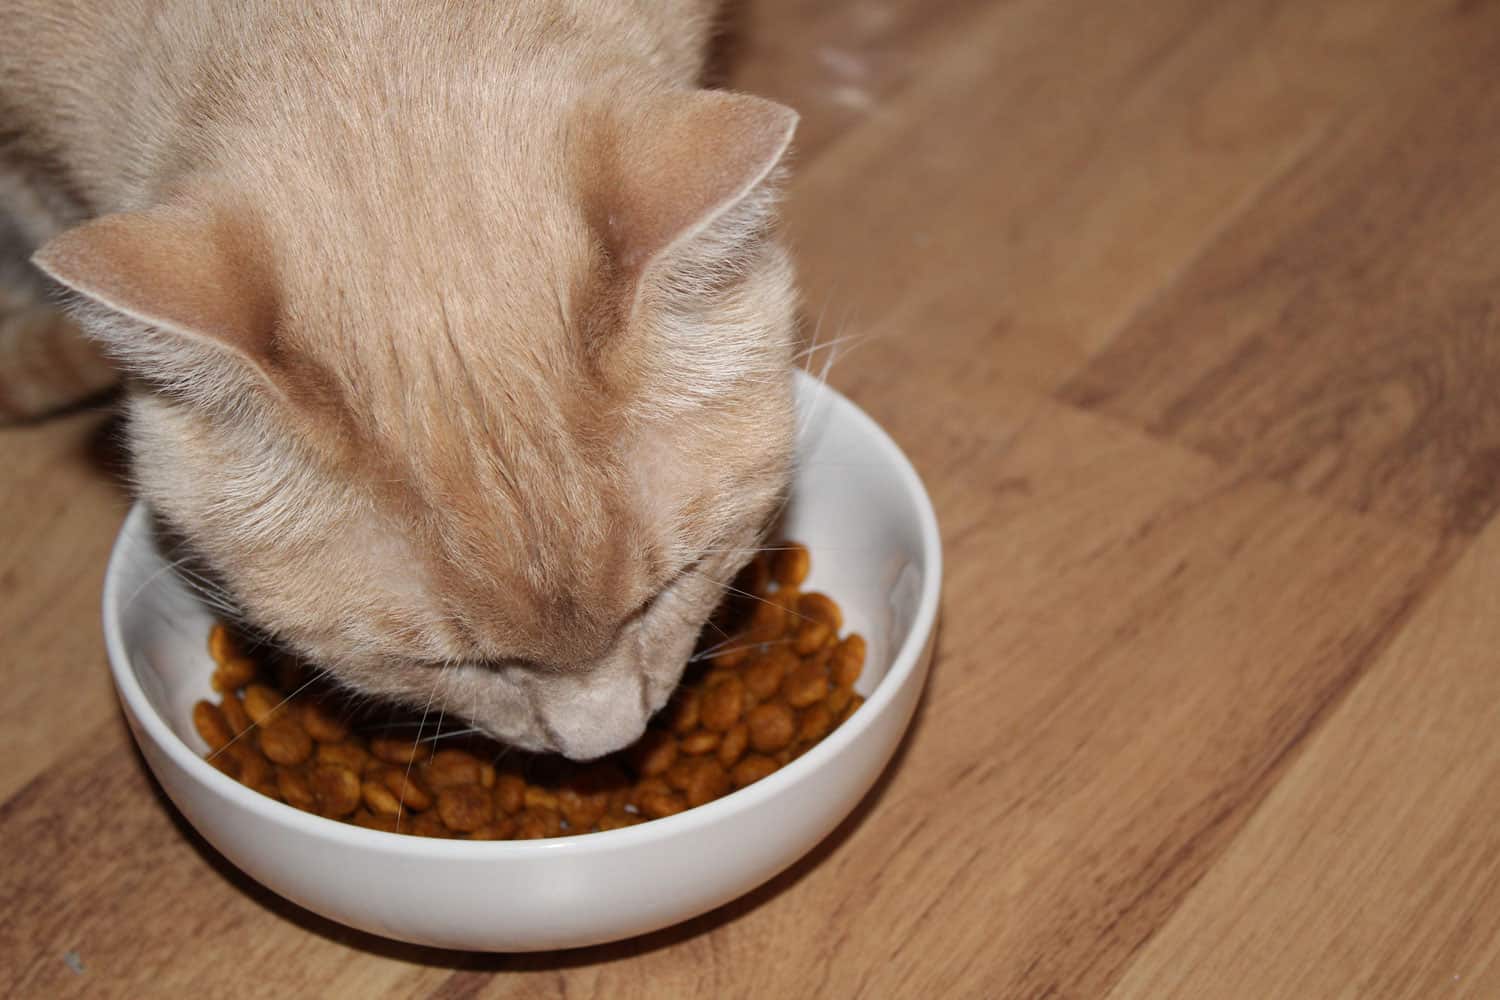 Male Orange Cat Eating Kibble Out of a White Dish
